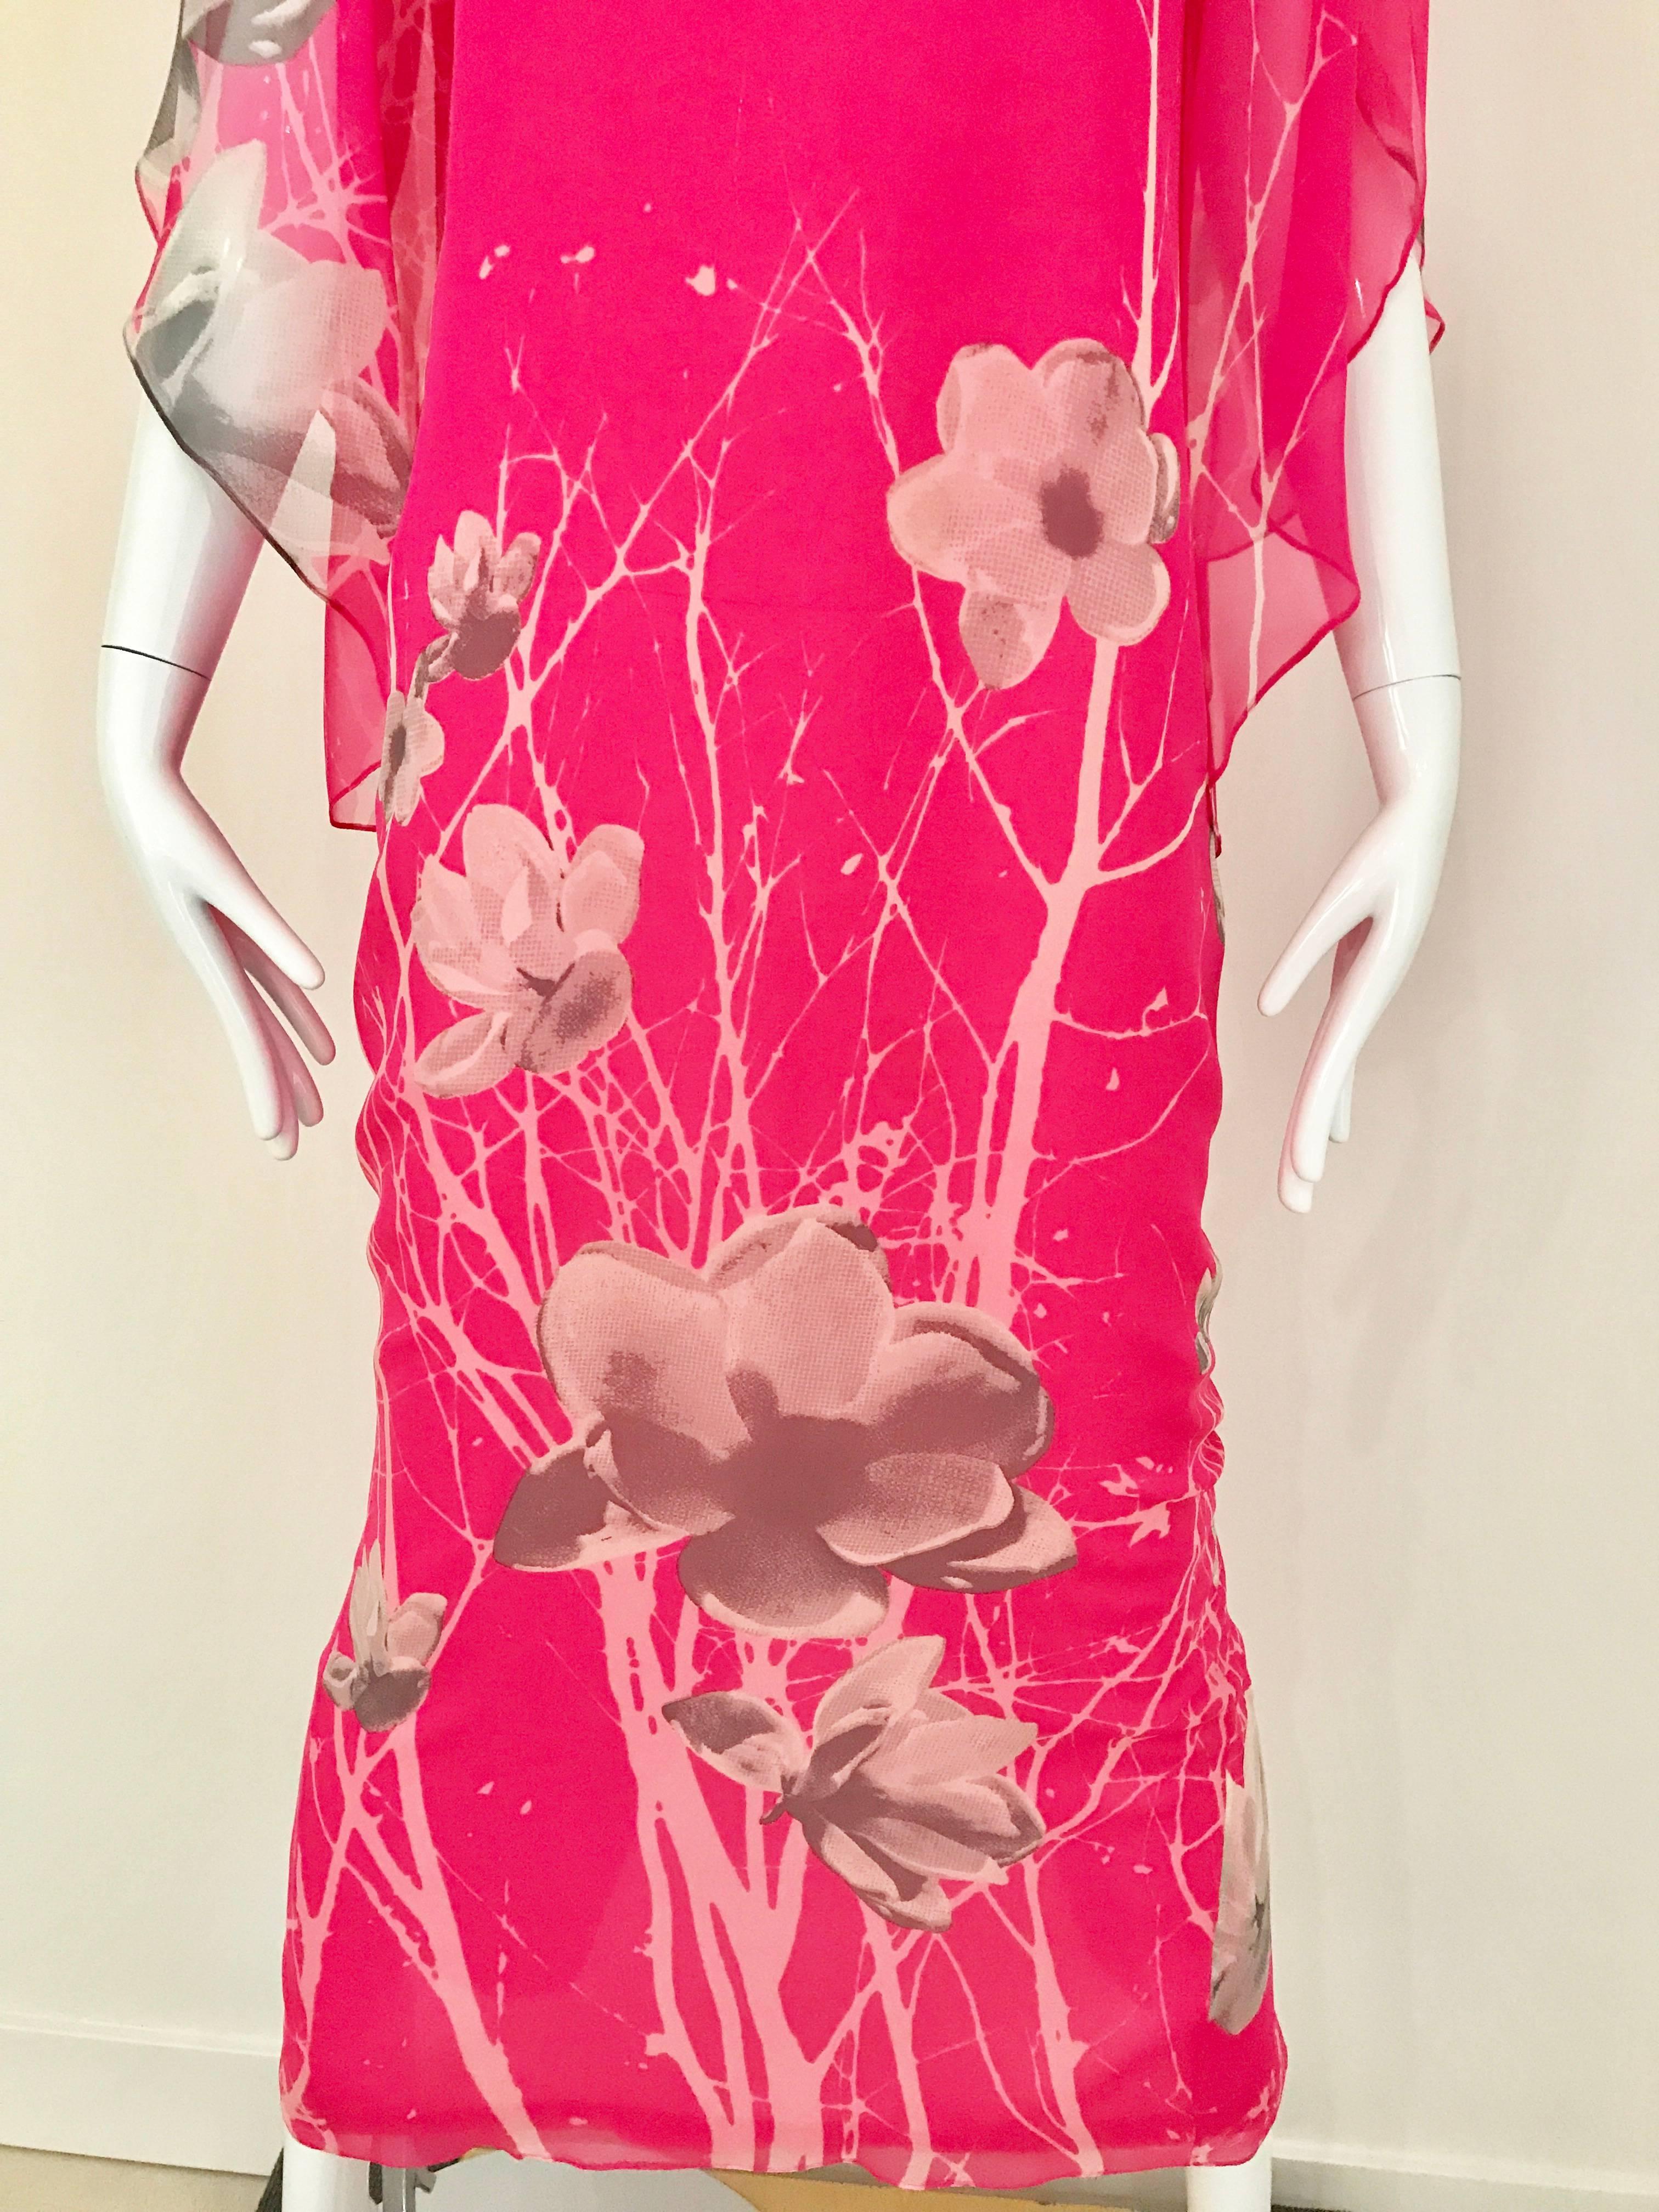 Vintage 1970s Hanae Mori bright hot pink and grey floral print Caftan style maxi dress. 
Dress has  3/4 sleeves and button at the back.  
Measurement:
Bust: 36 inch  / Waist: 34 inch  / Hip: 37 / Dress Length is 54 inch
Fit Modern Size : 4/6  Small